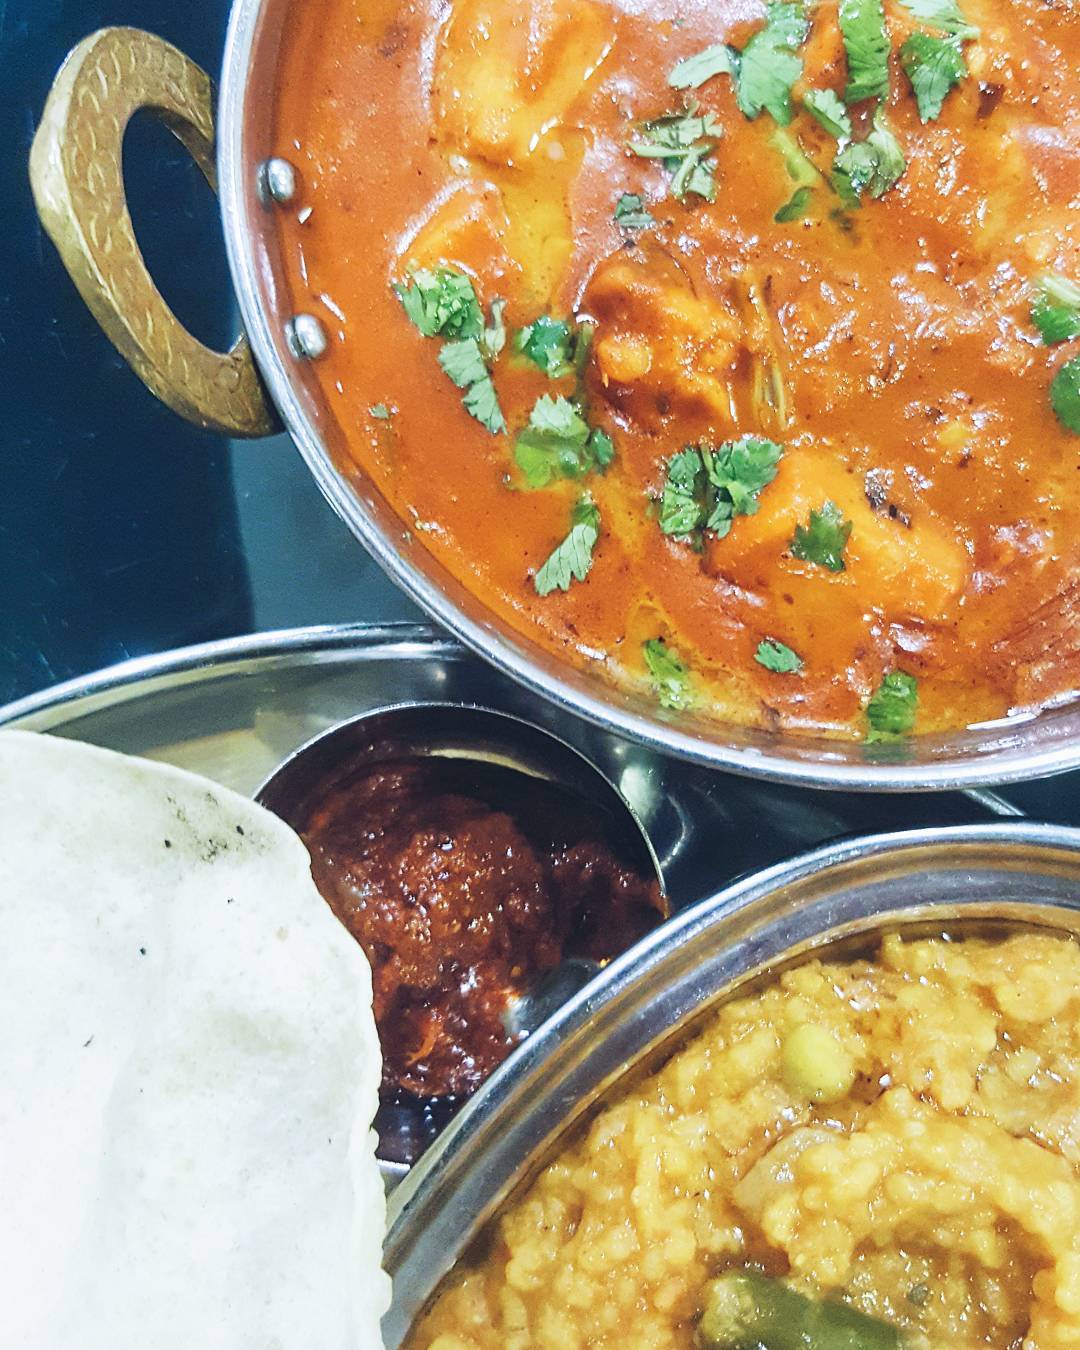 10 Vegetarian Food Delivery Options In Singapore For Meatless Meals Sent Straight To Your Door paneer butter masala